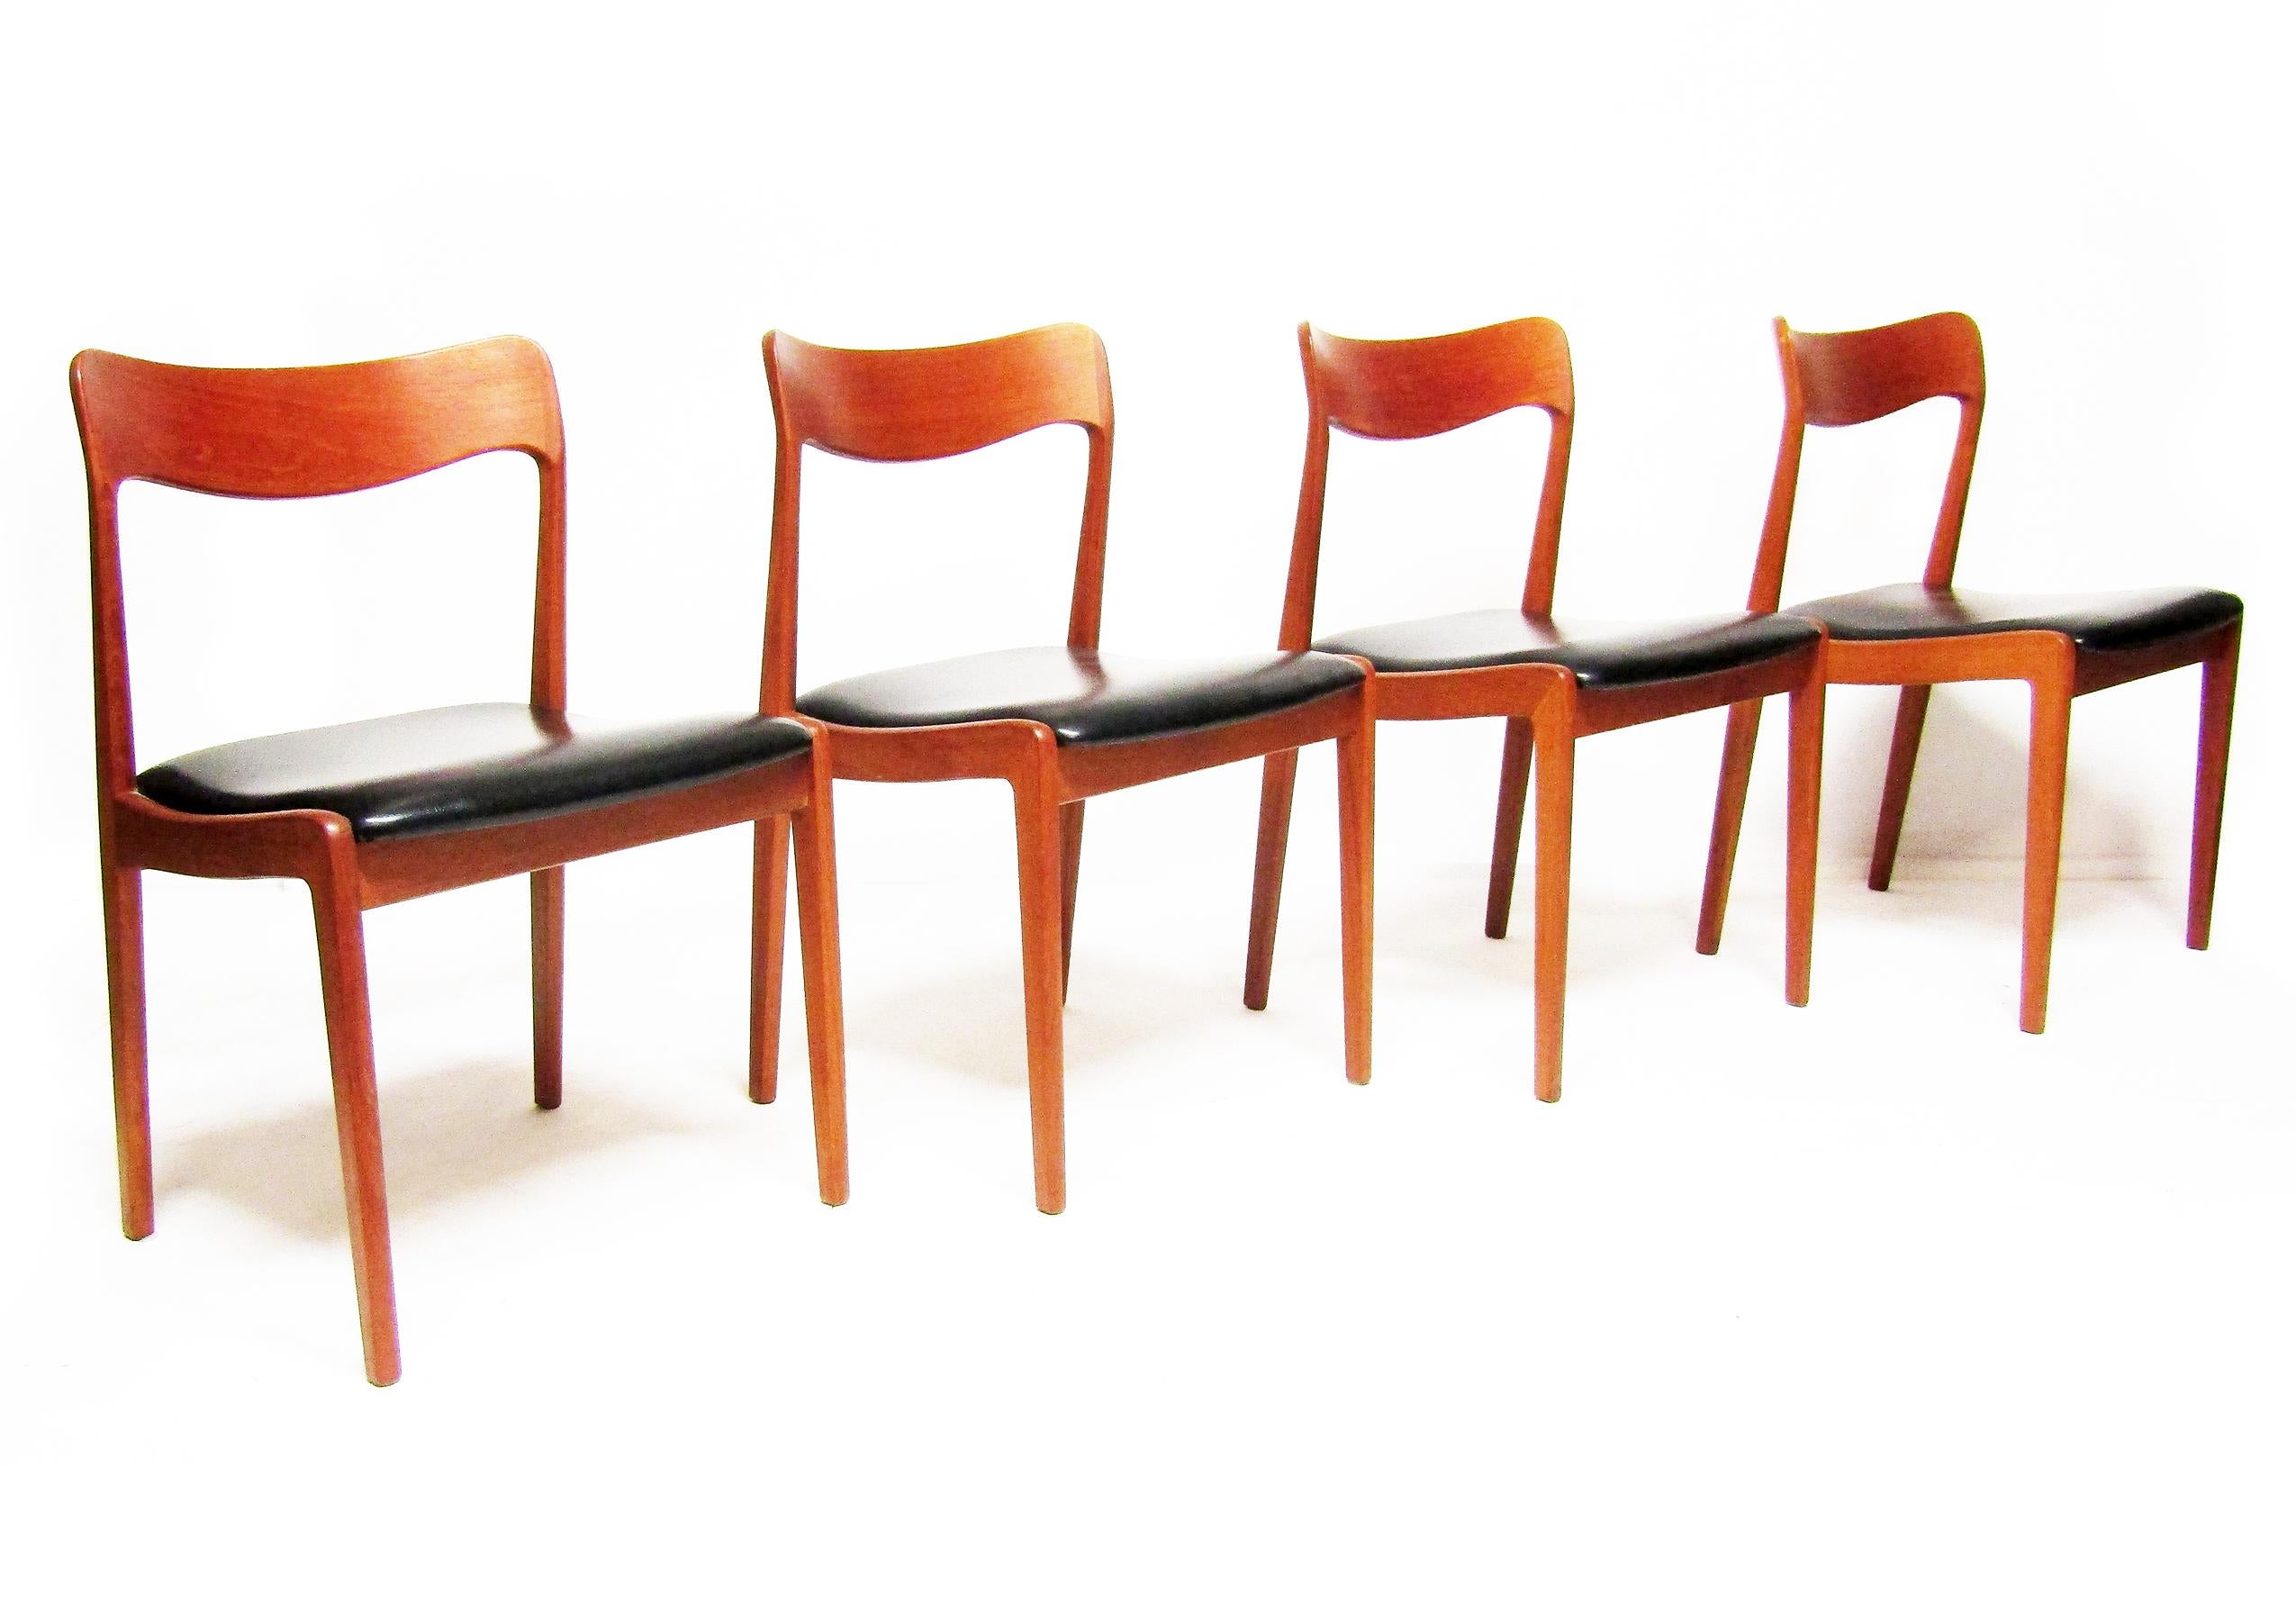 A set of four 1960s vintage dining chairs by Danish designer Henning Kjaernulf for Korup Stolefabrik.

Made from solid teak, the organically shaped backs and sculpted frames are ergonomic as well as graceful. Similar to Neils Moller designs, they